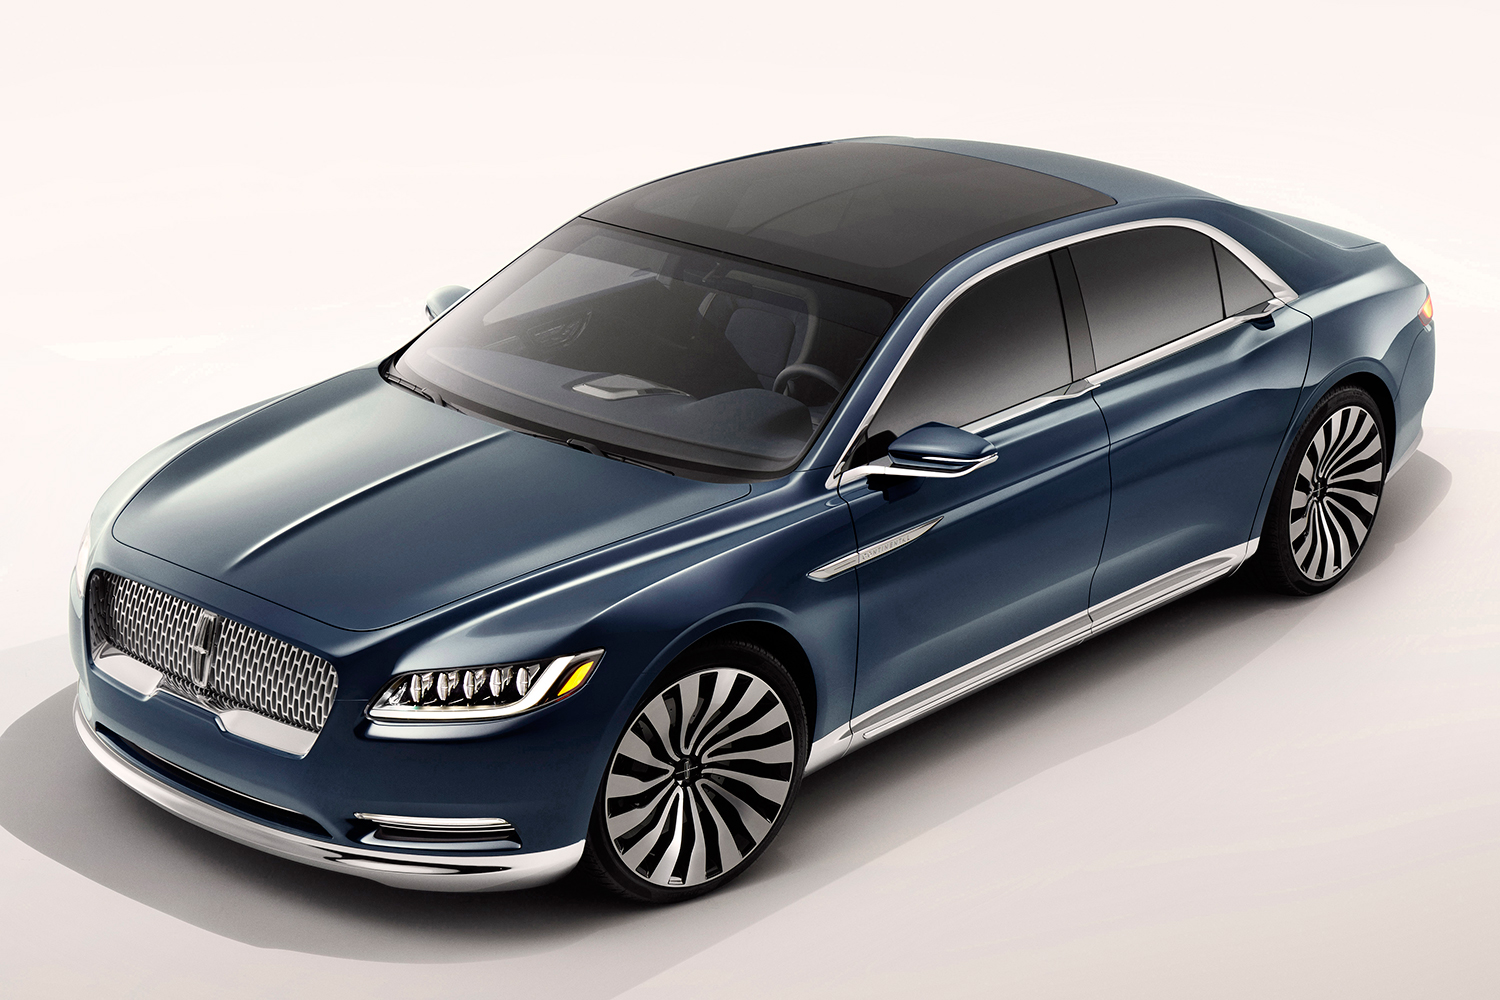 top 5 concept cars of 2015 opinion pictures specs lincolncontinentalconcept 05 front  high